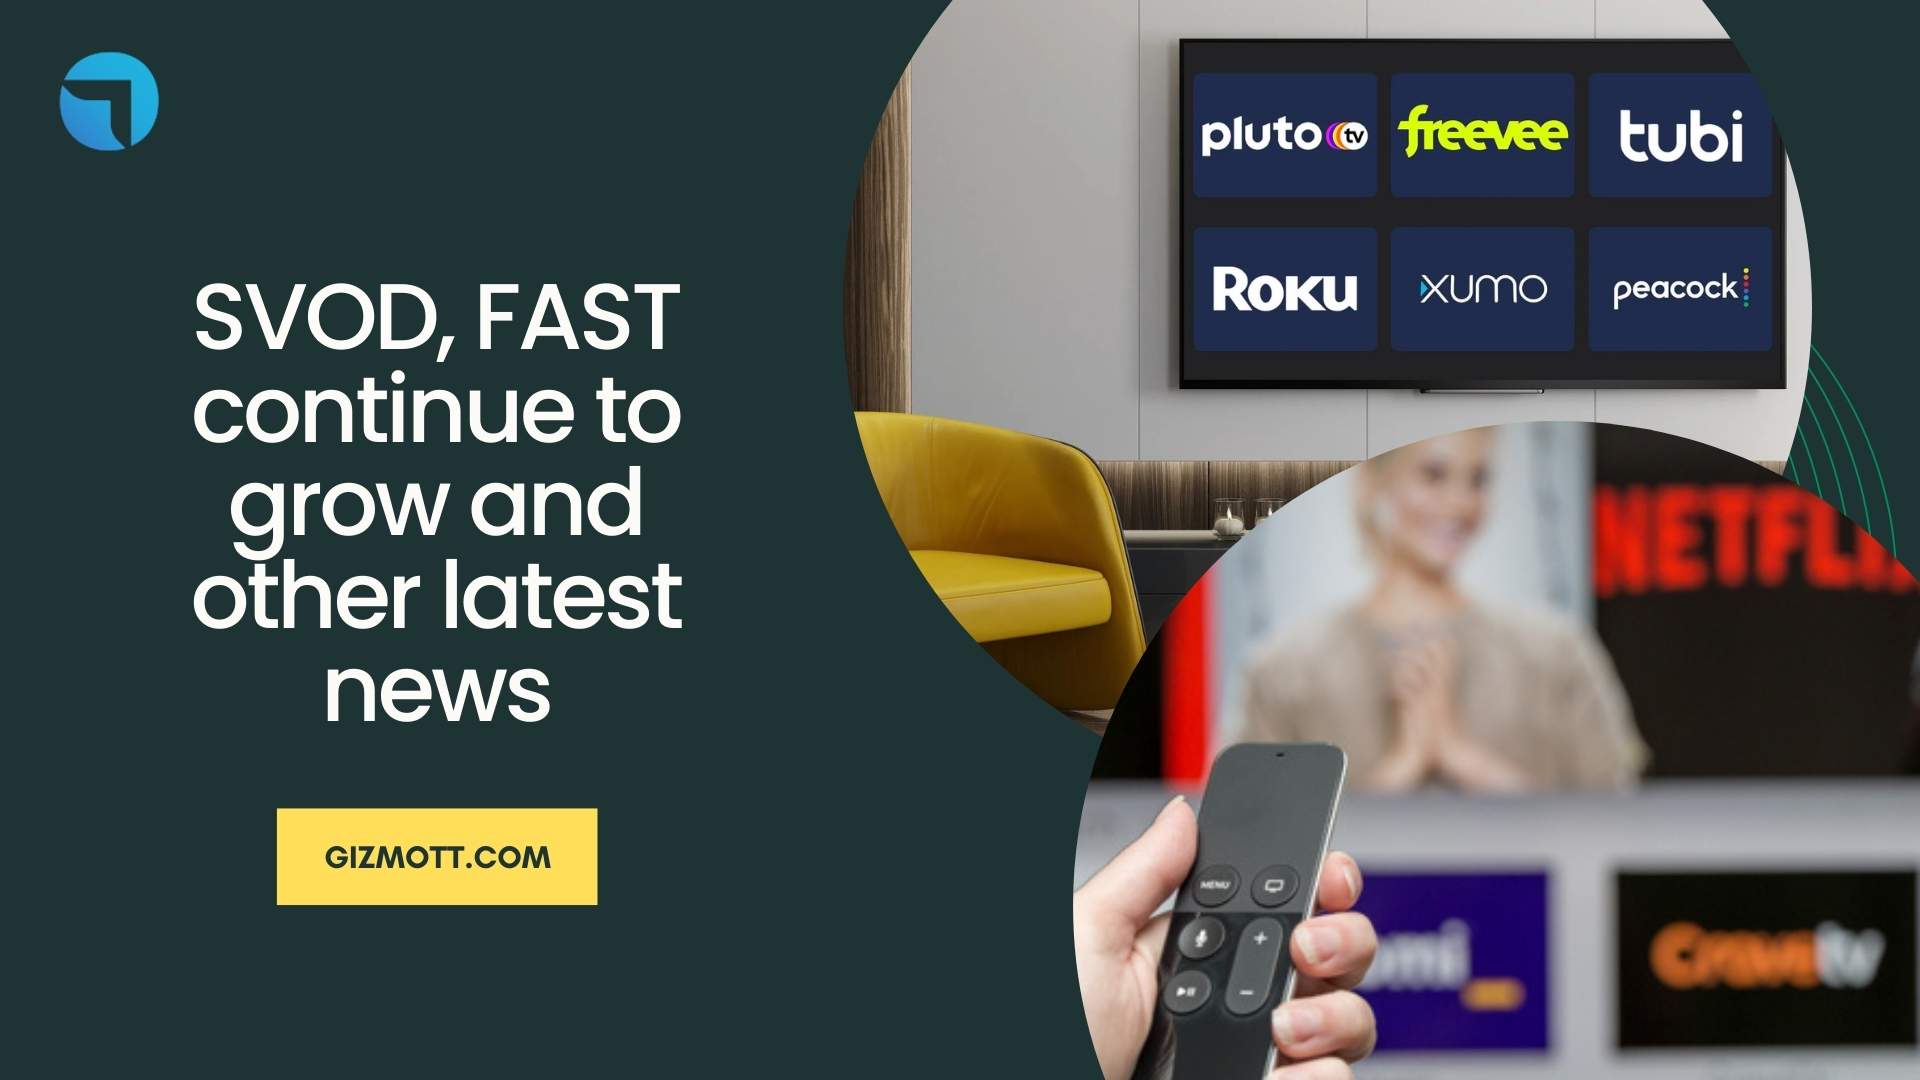 SVOD, FAST continue to grow and other latest news